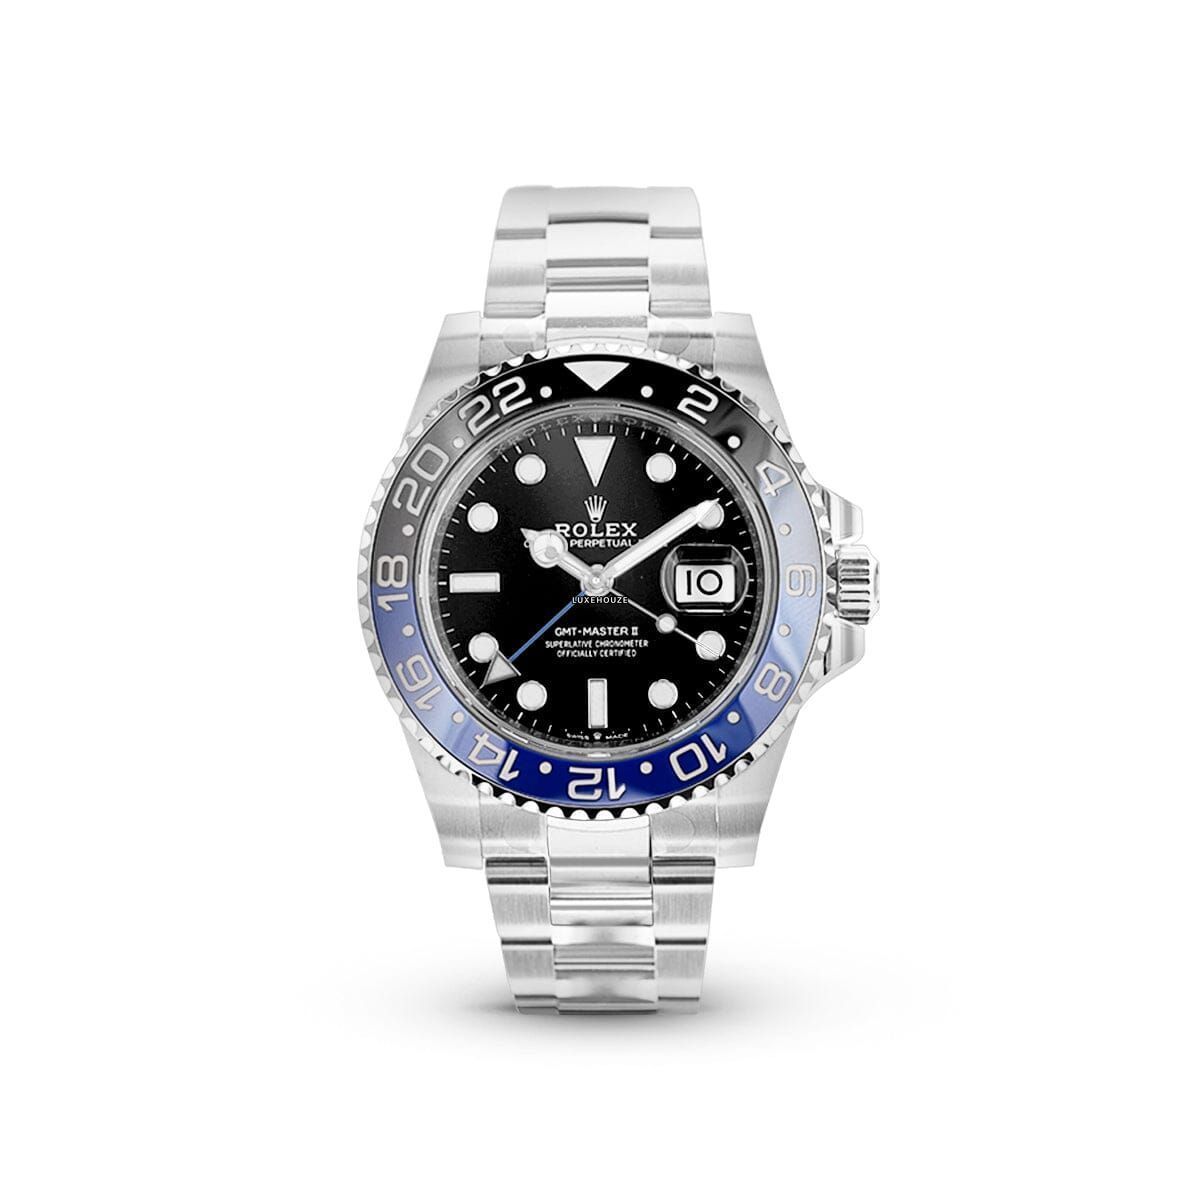 GMT Master II 126710BLNR Black Oyster Watches Rolex 